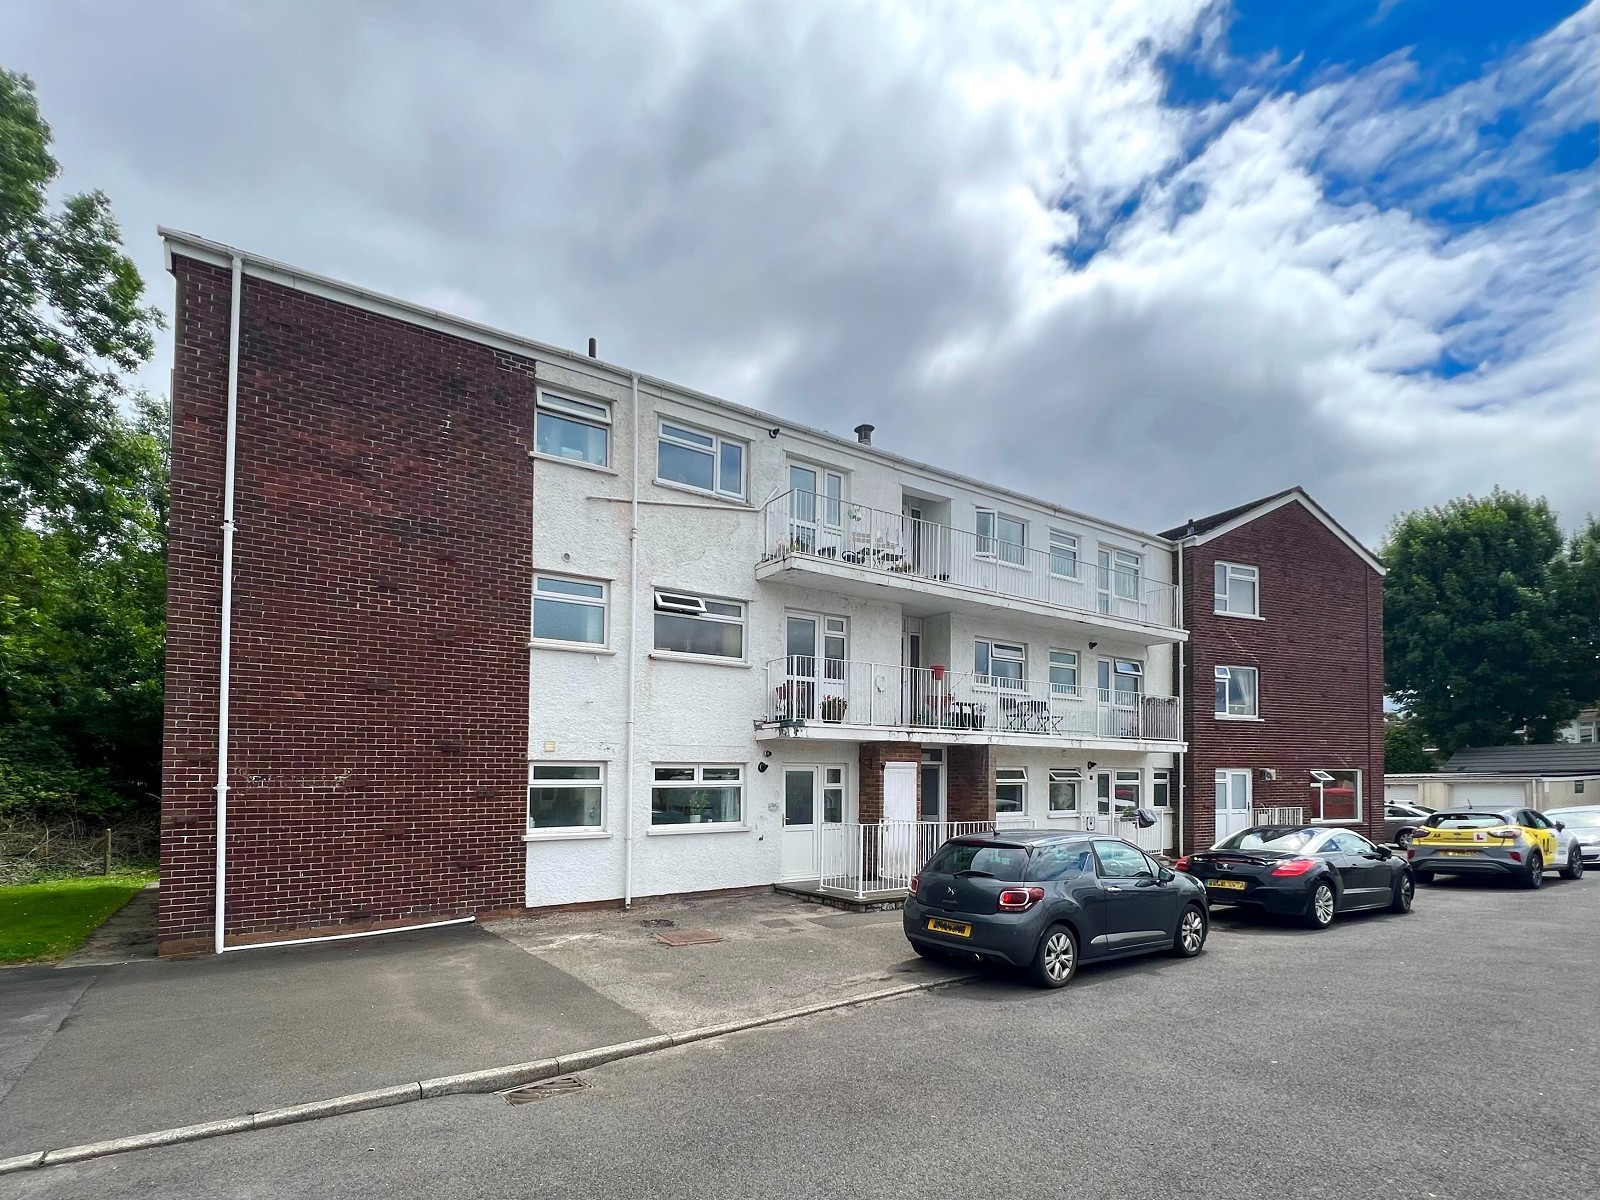 Similar Property: Flat in Whitchurch